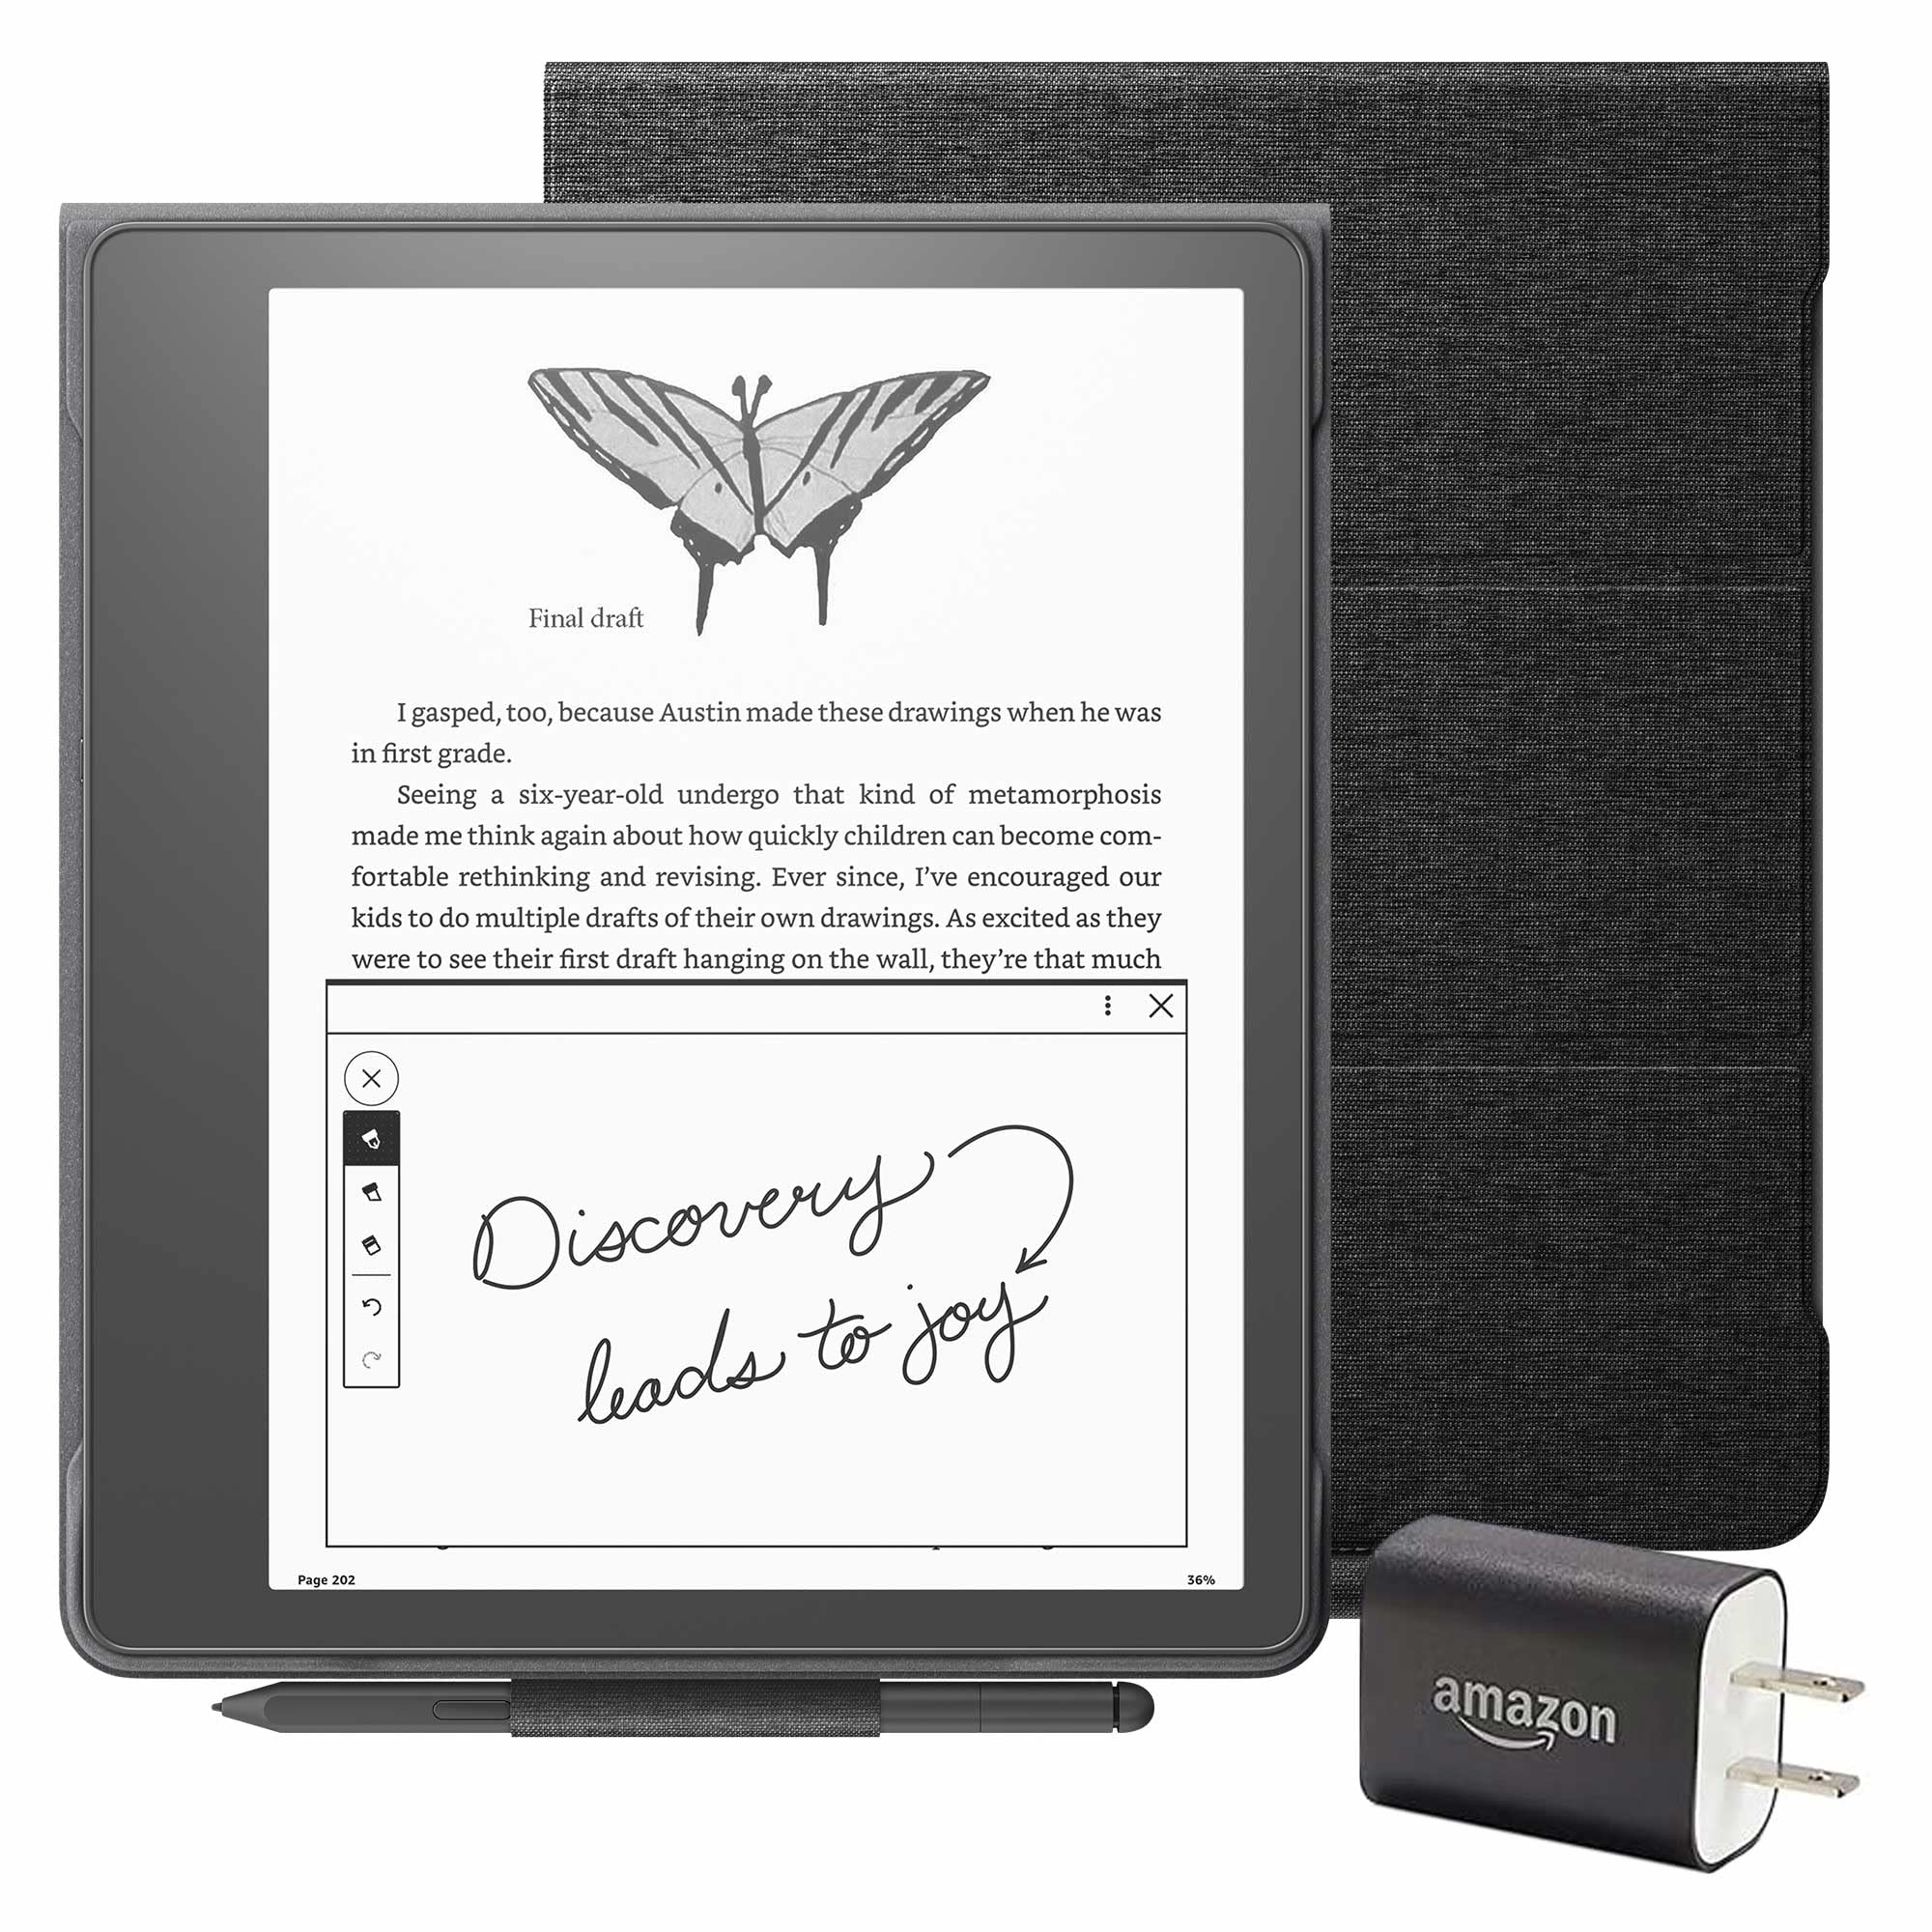 Kindle Scribe Essentials Bundle including Kindle Scribe (32 GB), Premium Pen, Fabric Folio Cover with Magnetic Attach - Black, and Power Adapter